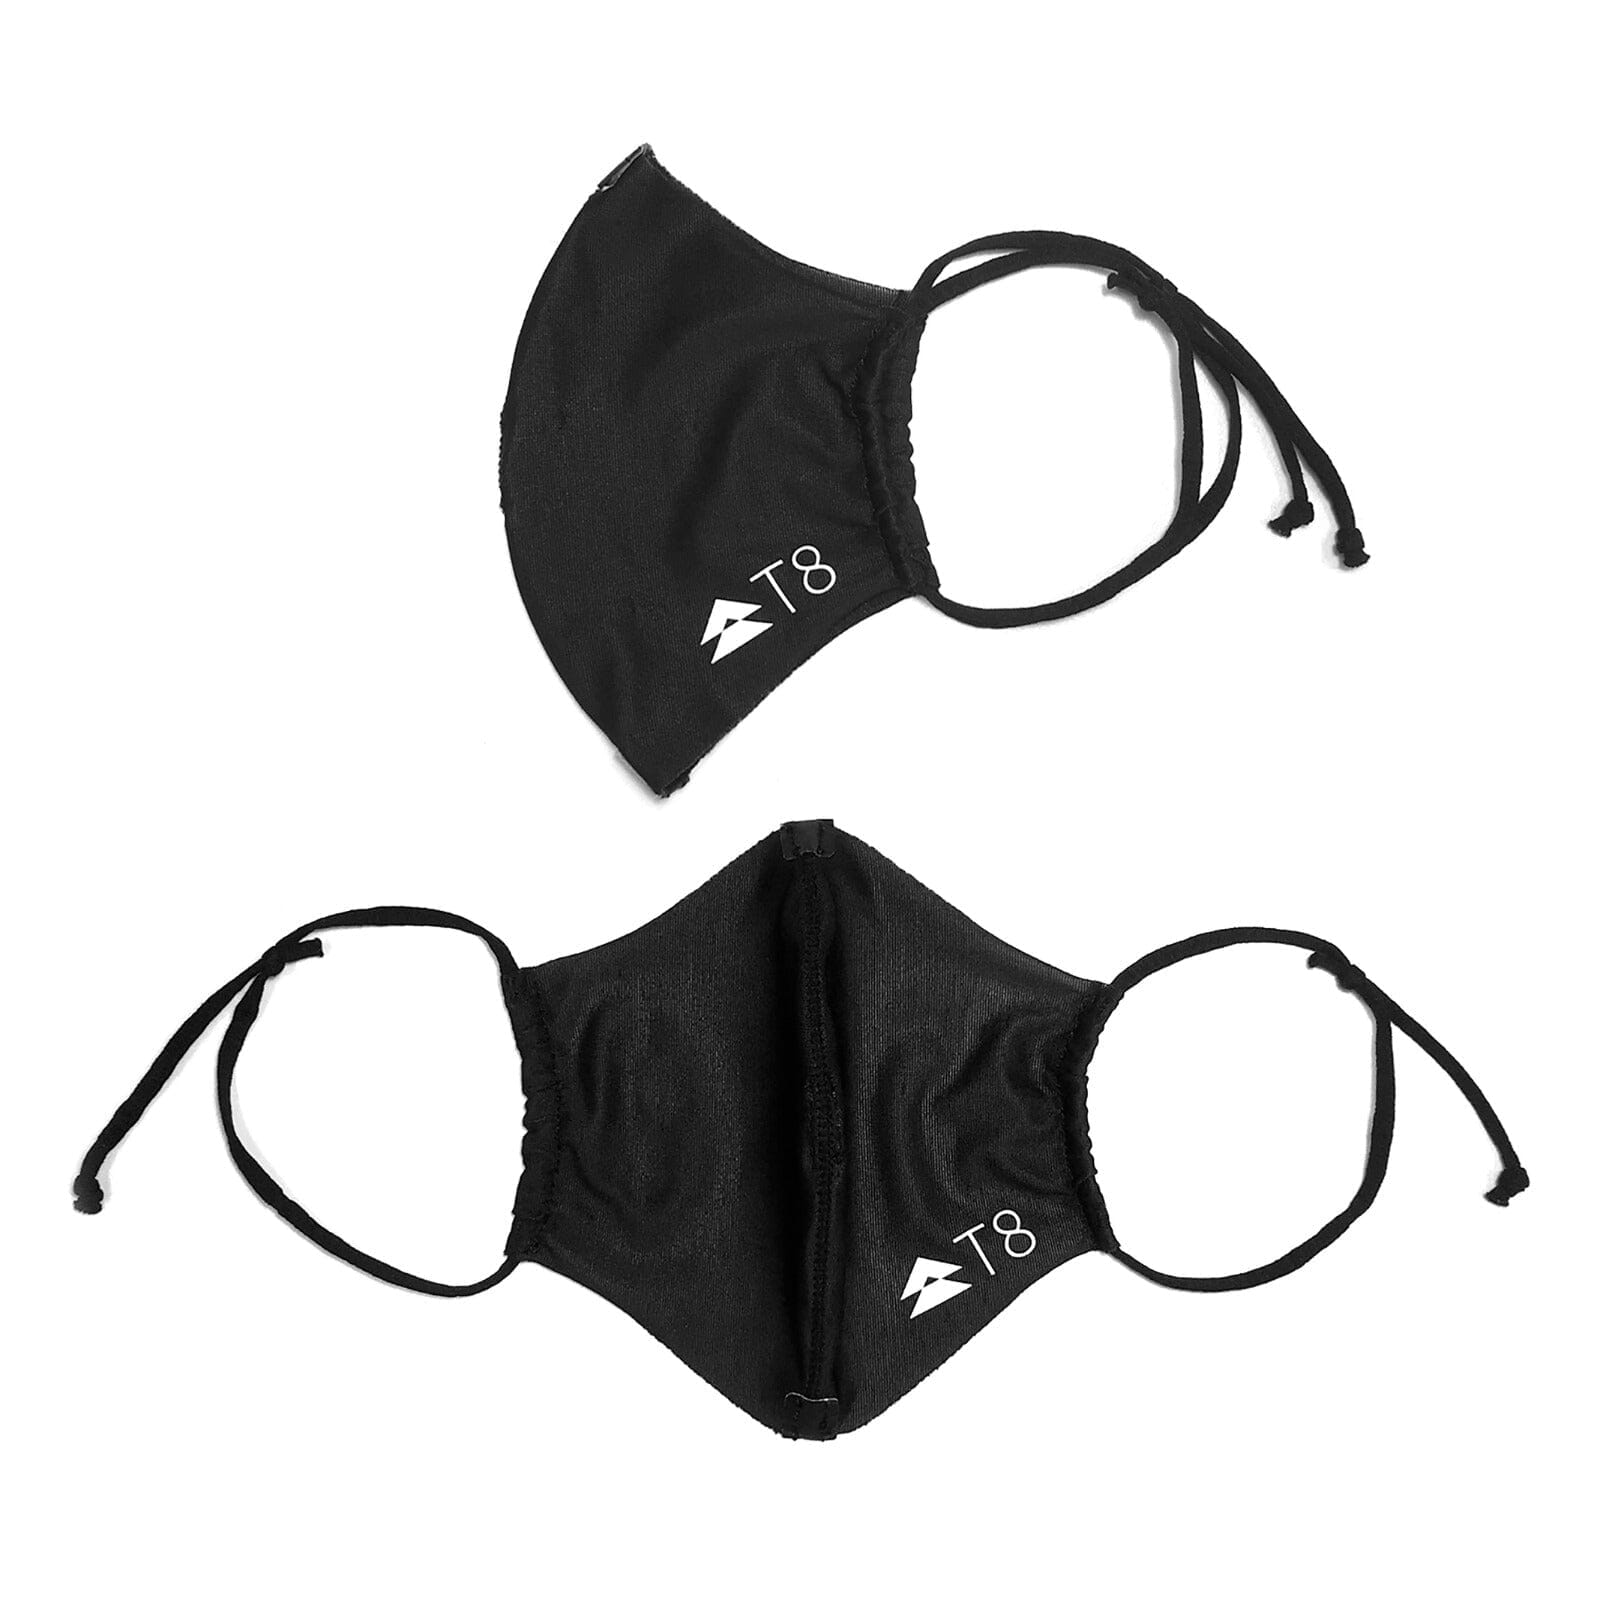 T8 MAX O2 Running Mask Pack of 2 Black OS 